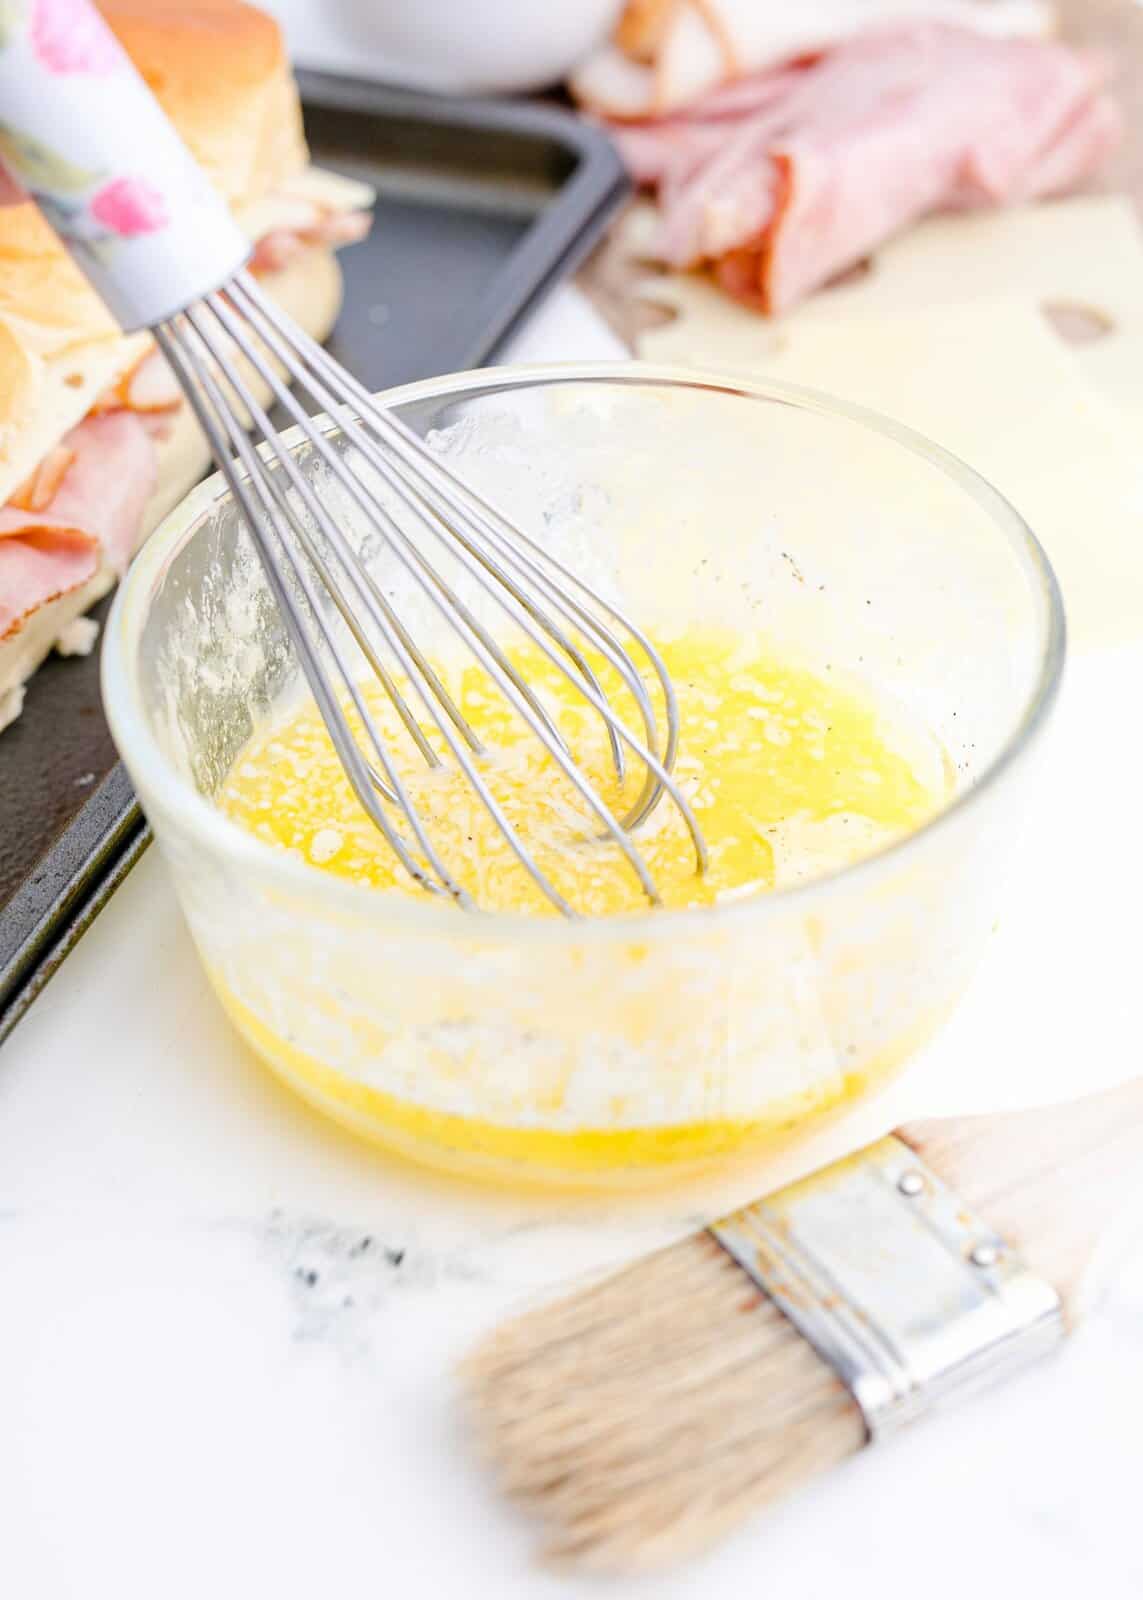 Butter, egg and pepper whisked together in bowl.